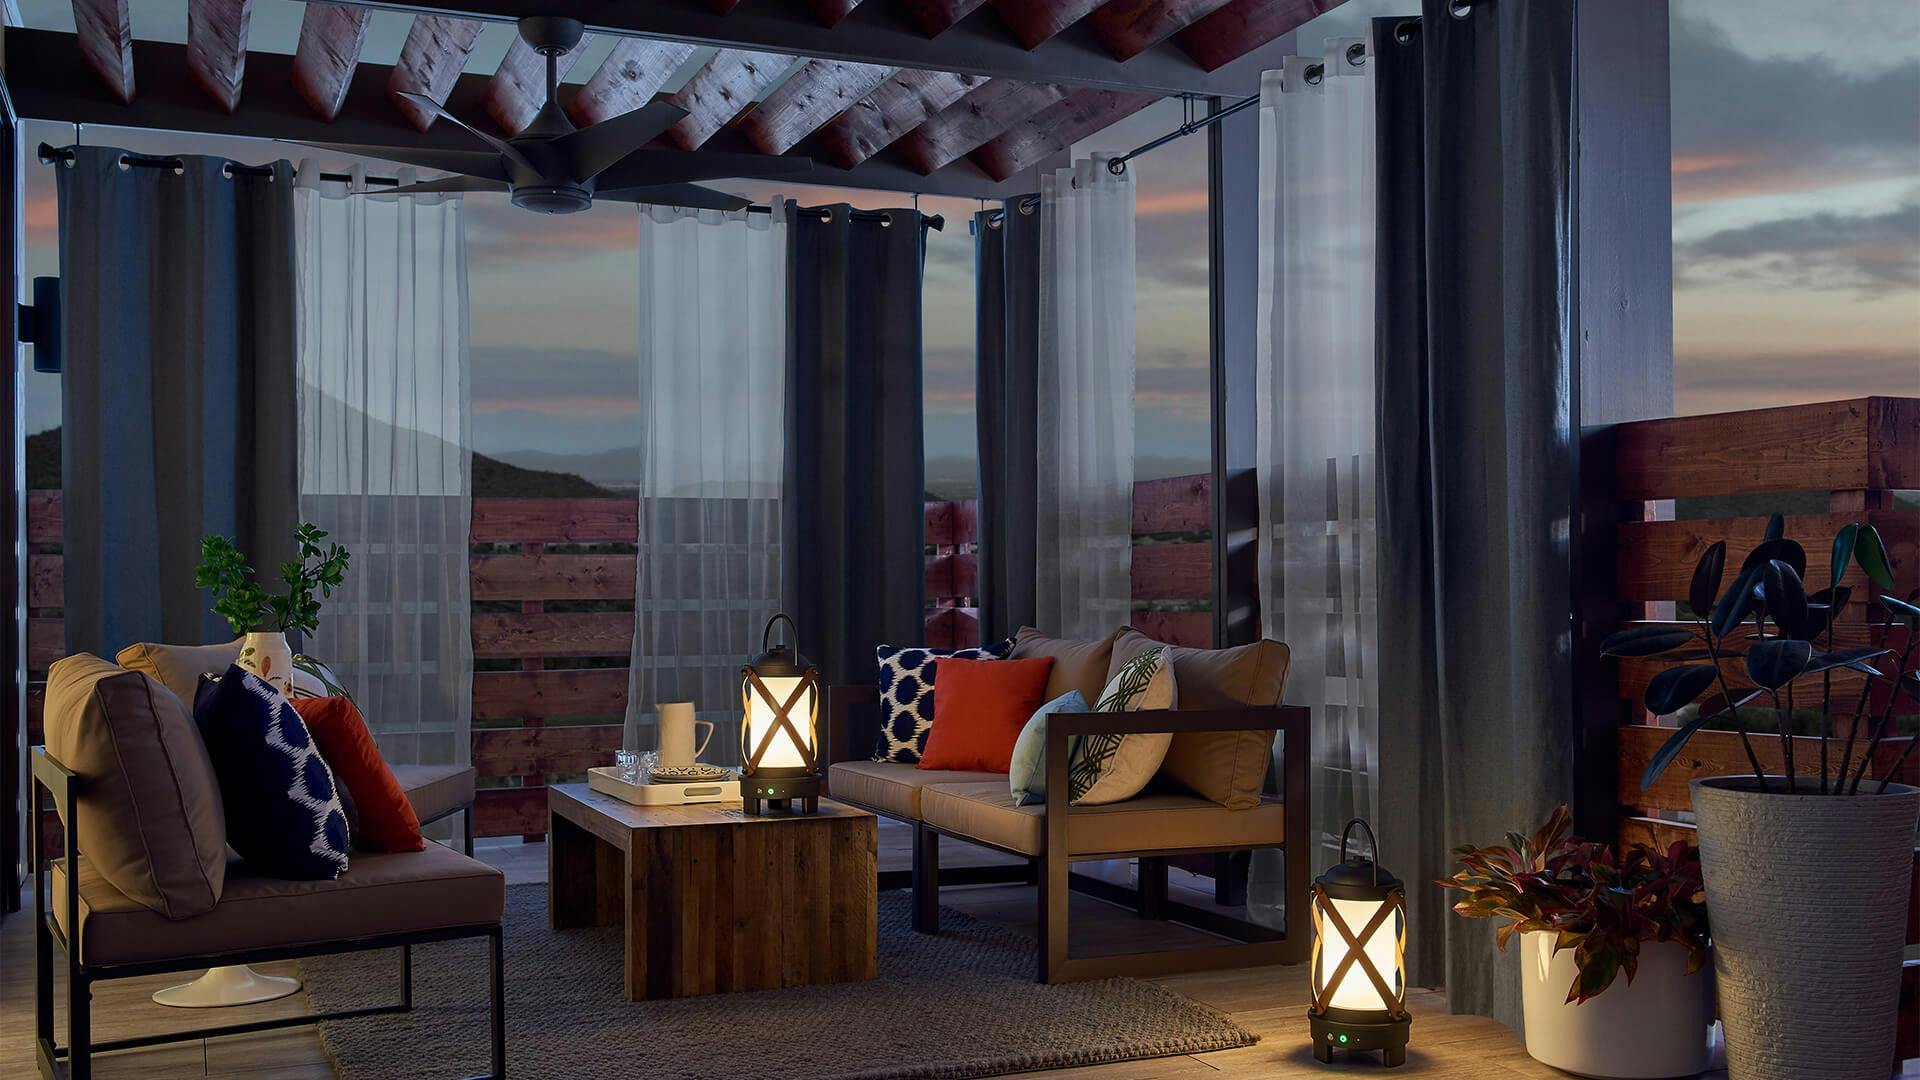 Patio lit by Berryhill lanterns and a Kichler outdoor fan